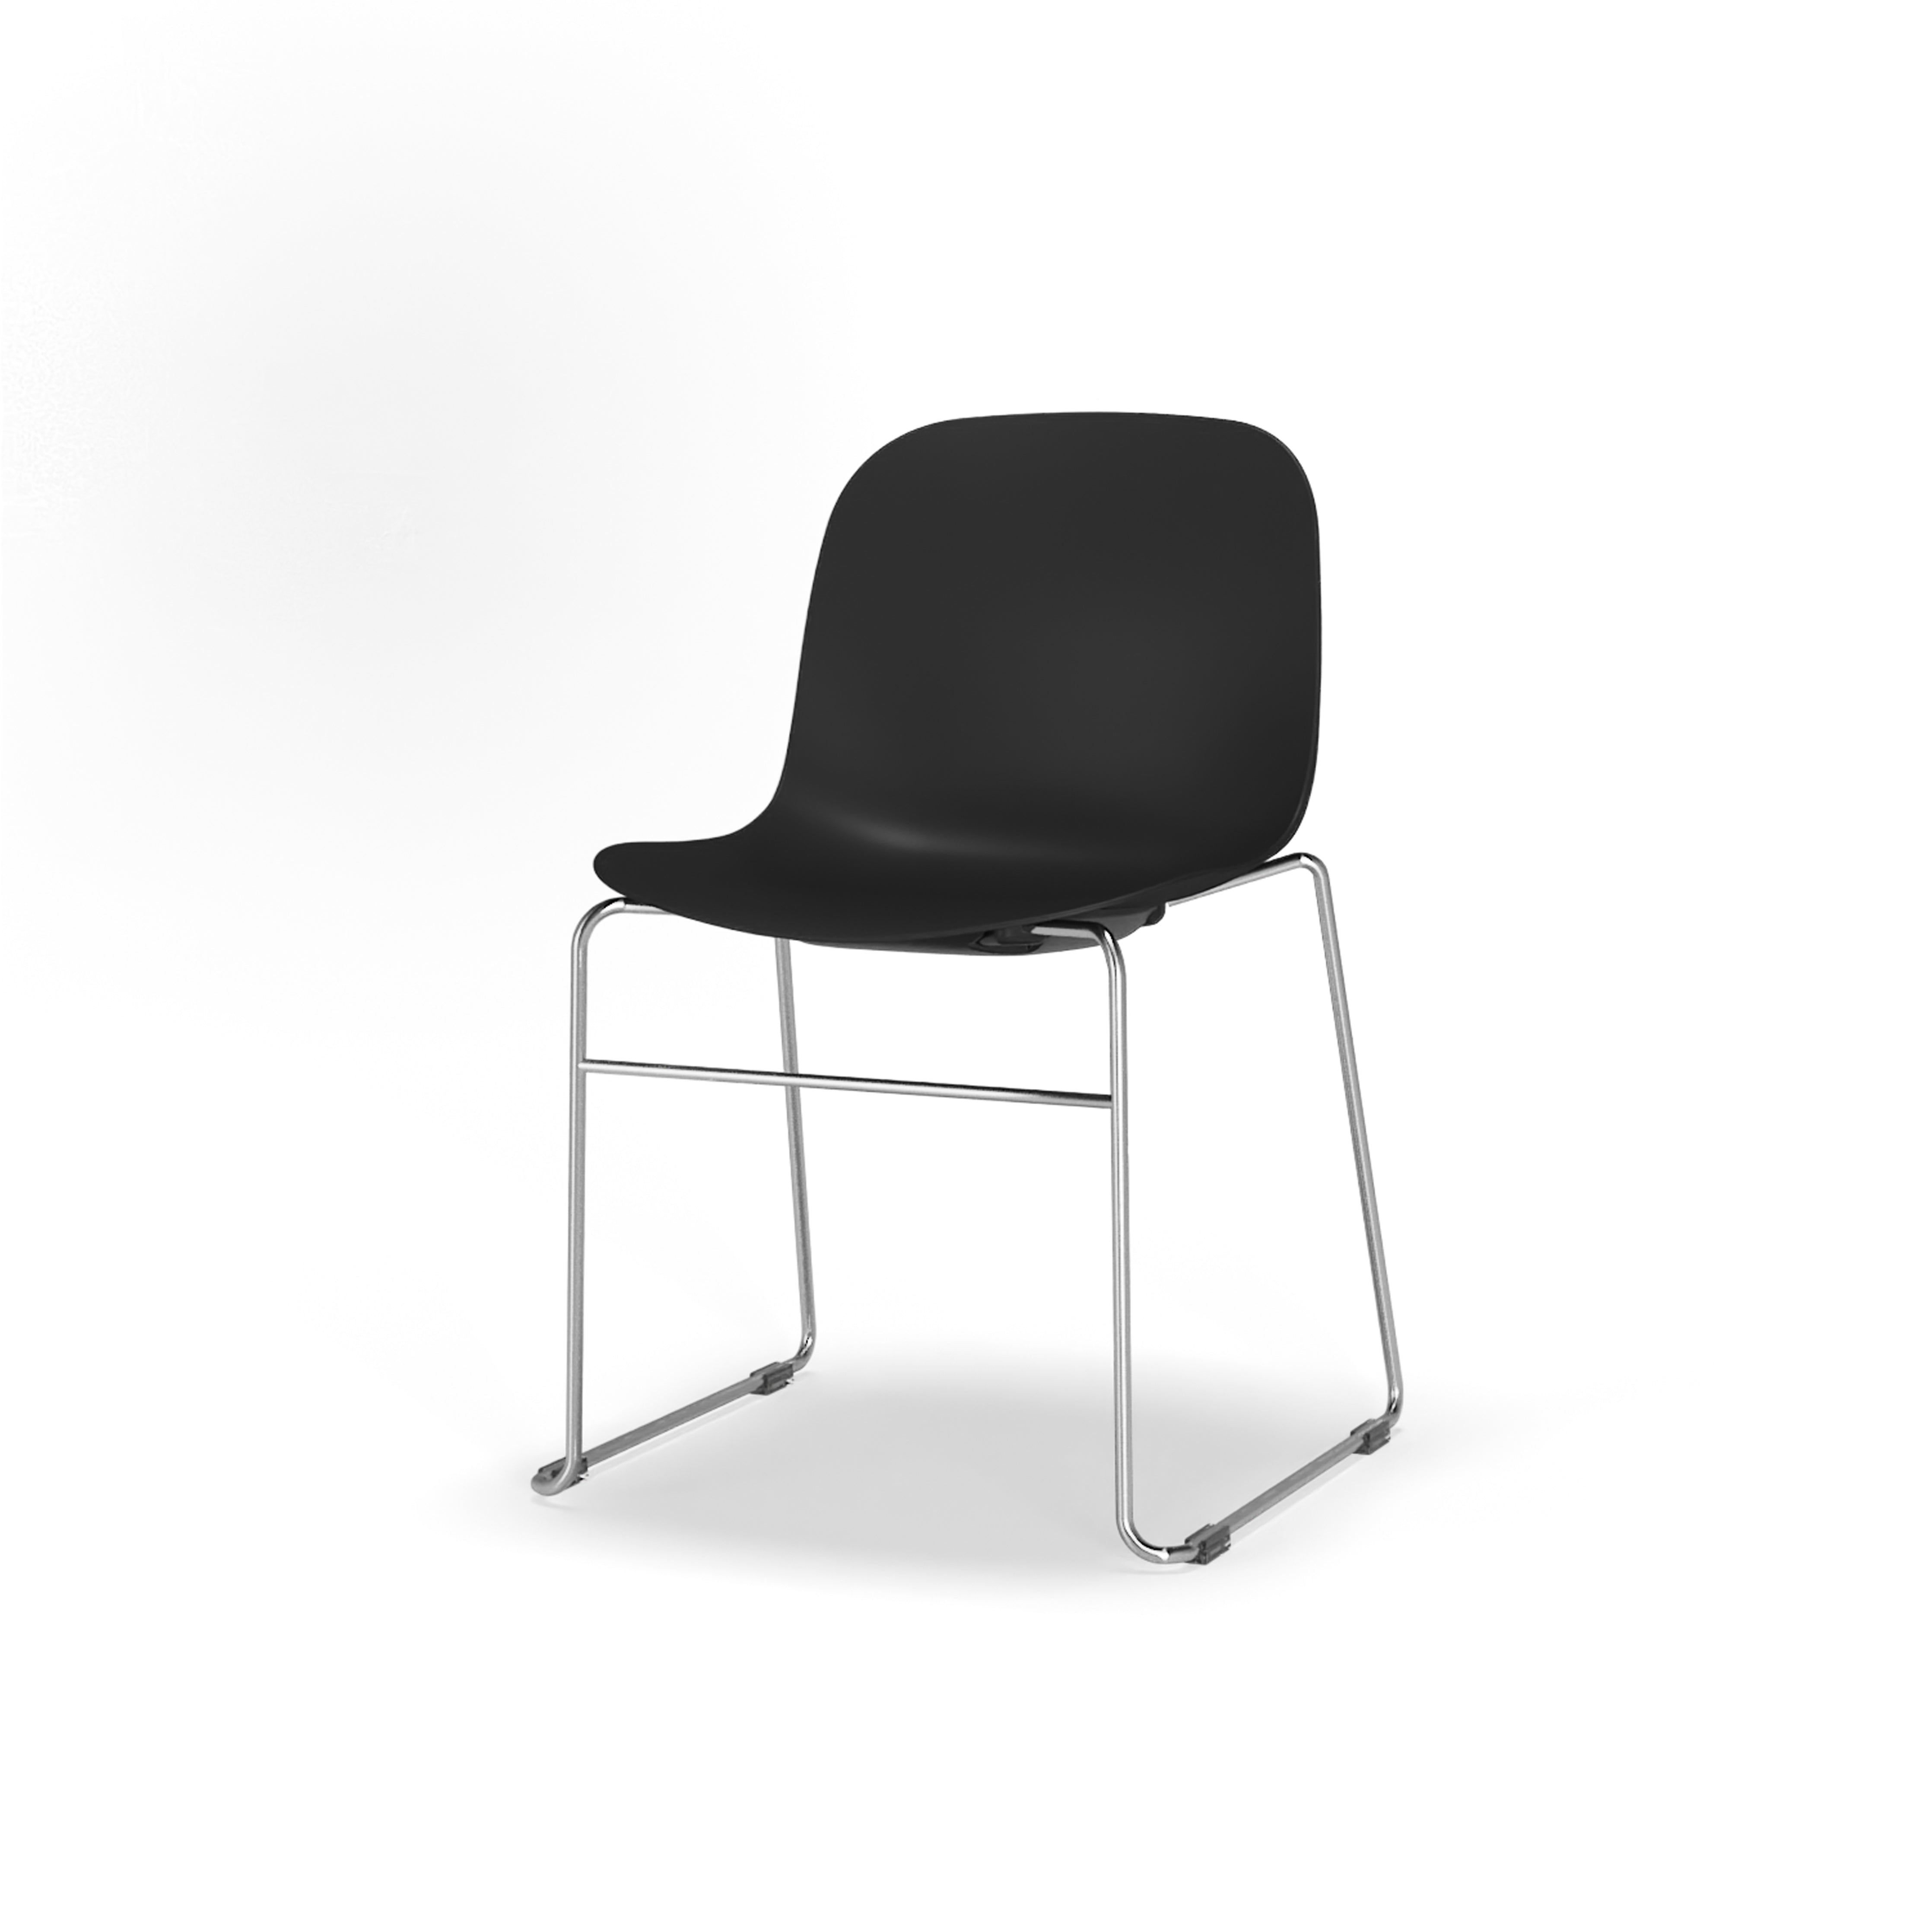 Layer Lite - Dining Chair